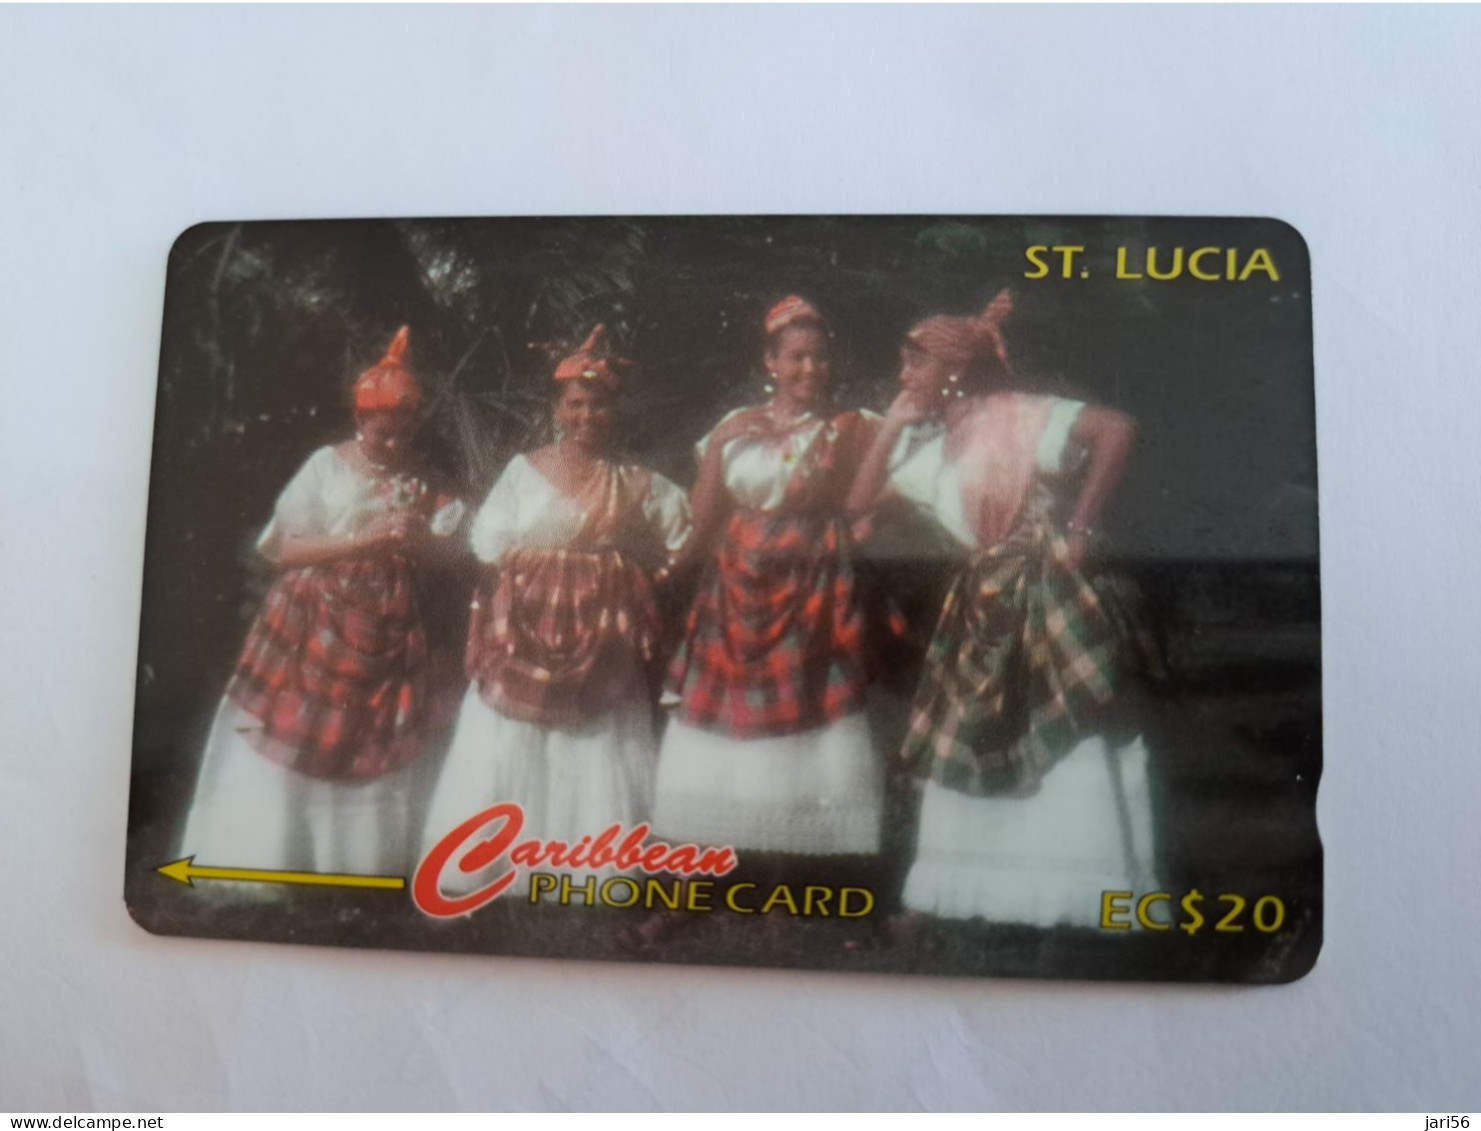 ST LUCIA    $ 20   CABLE & WIRELESS  STL-121A   121CSLA      Fine Used Card ** 14268** - St. Lucia